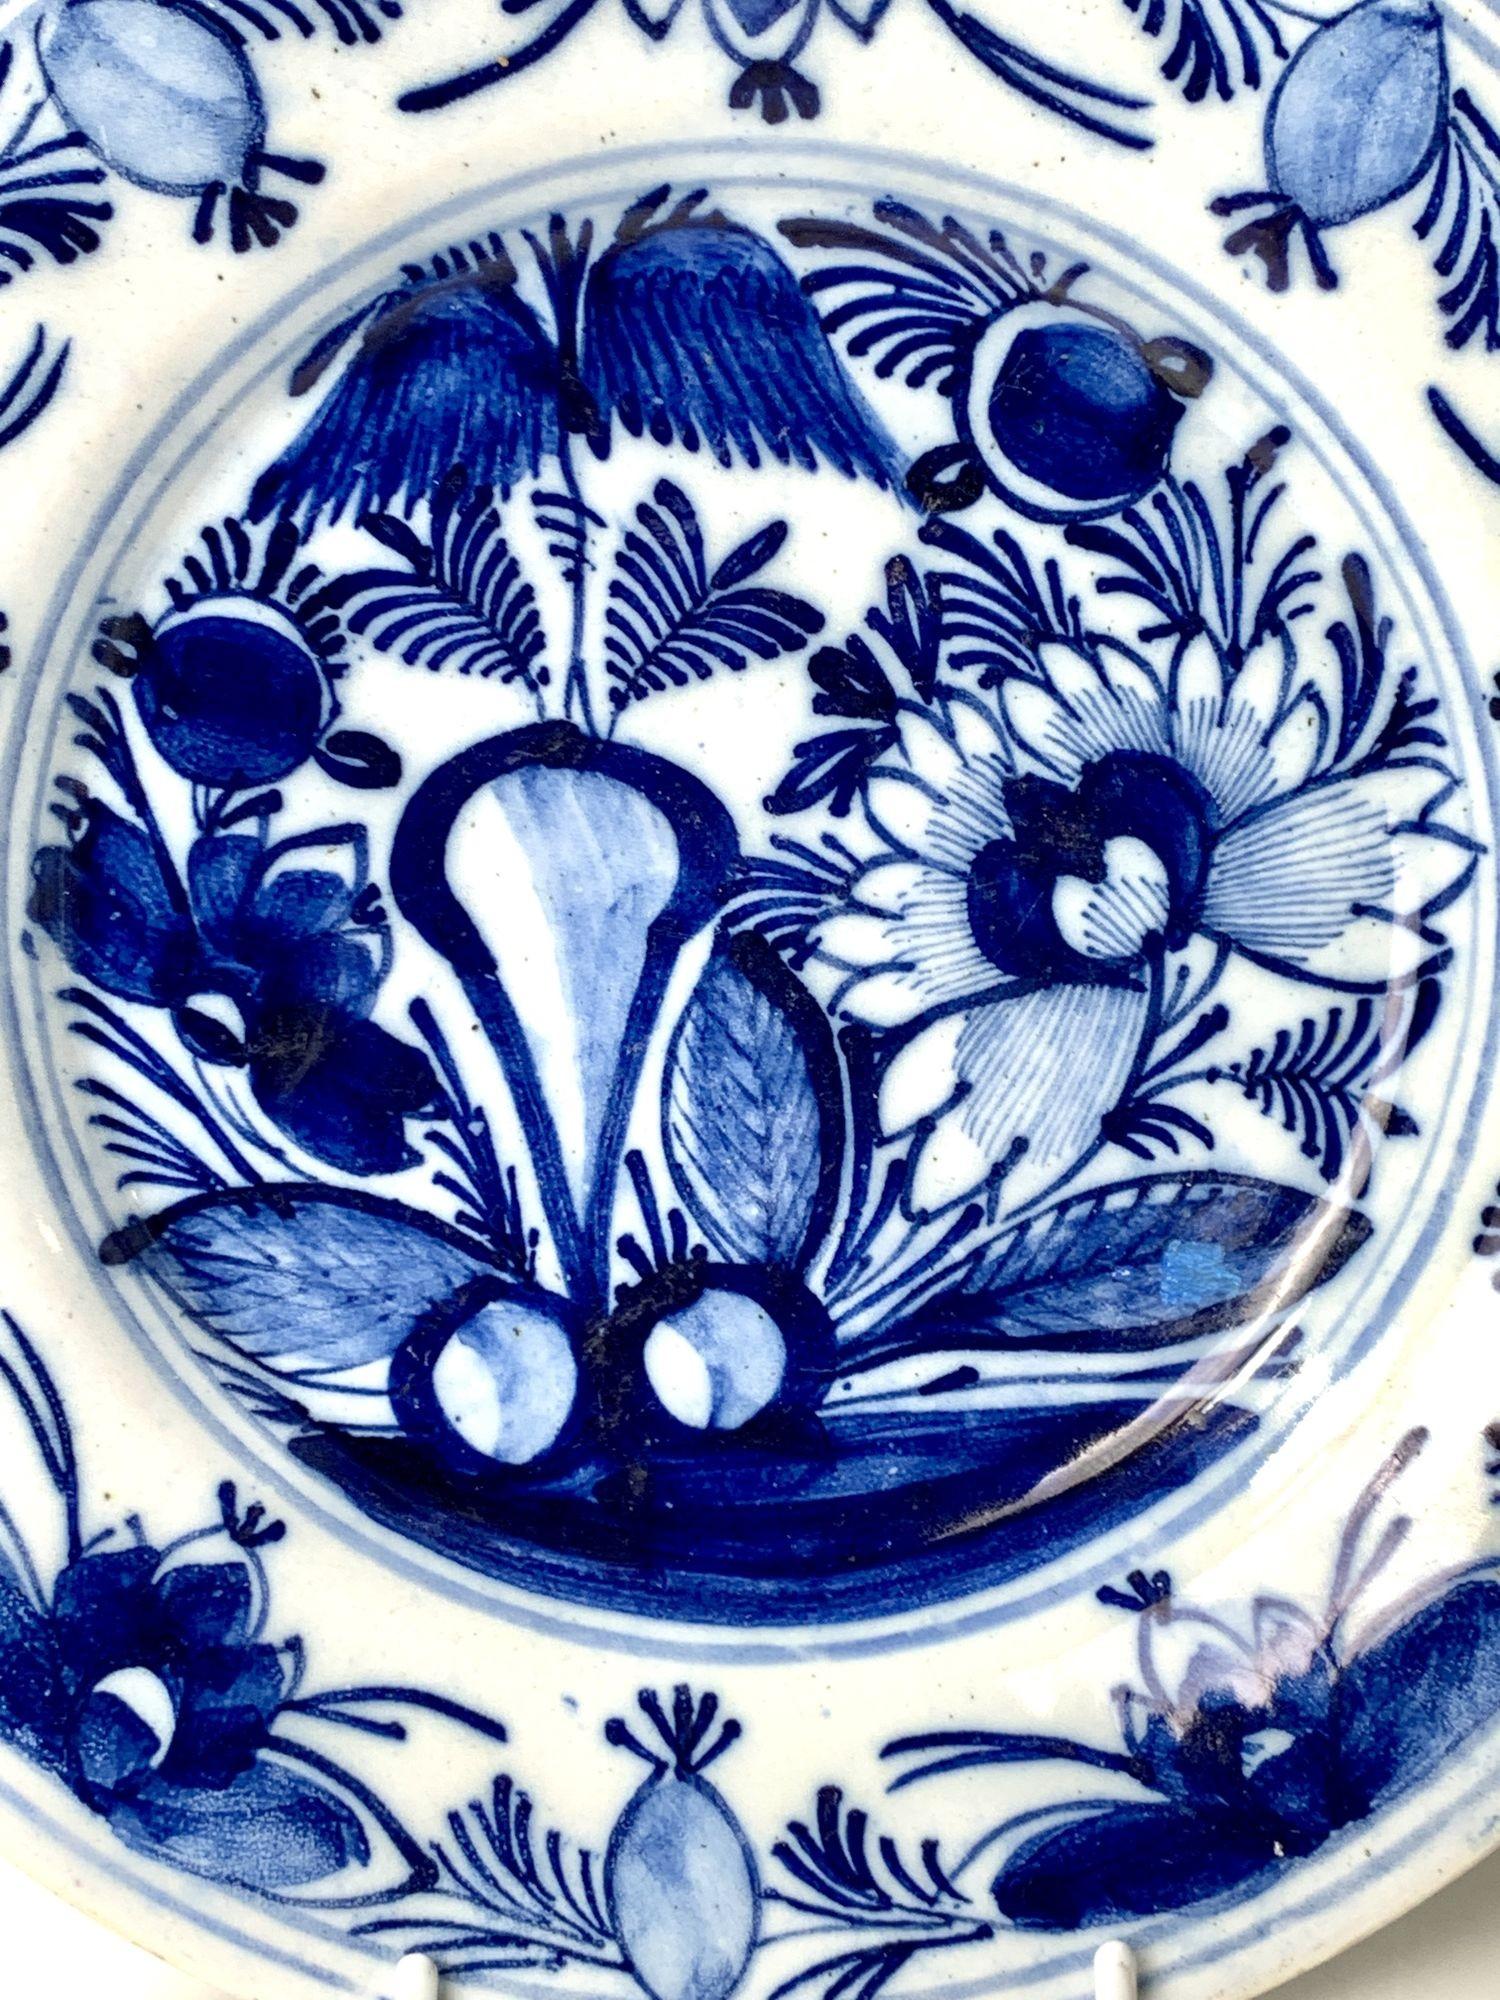 At the center of this lovely hand-painted blue and white Delft dish is a traditional chinoiserie view of a garden. 
We see an oversized peony, a willow tree, and rockwork. The wide border shows water lilies and flower buds. 
The artist used cobalt